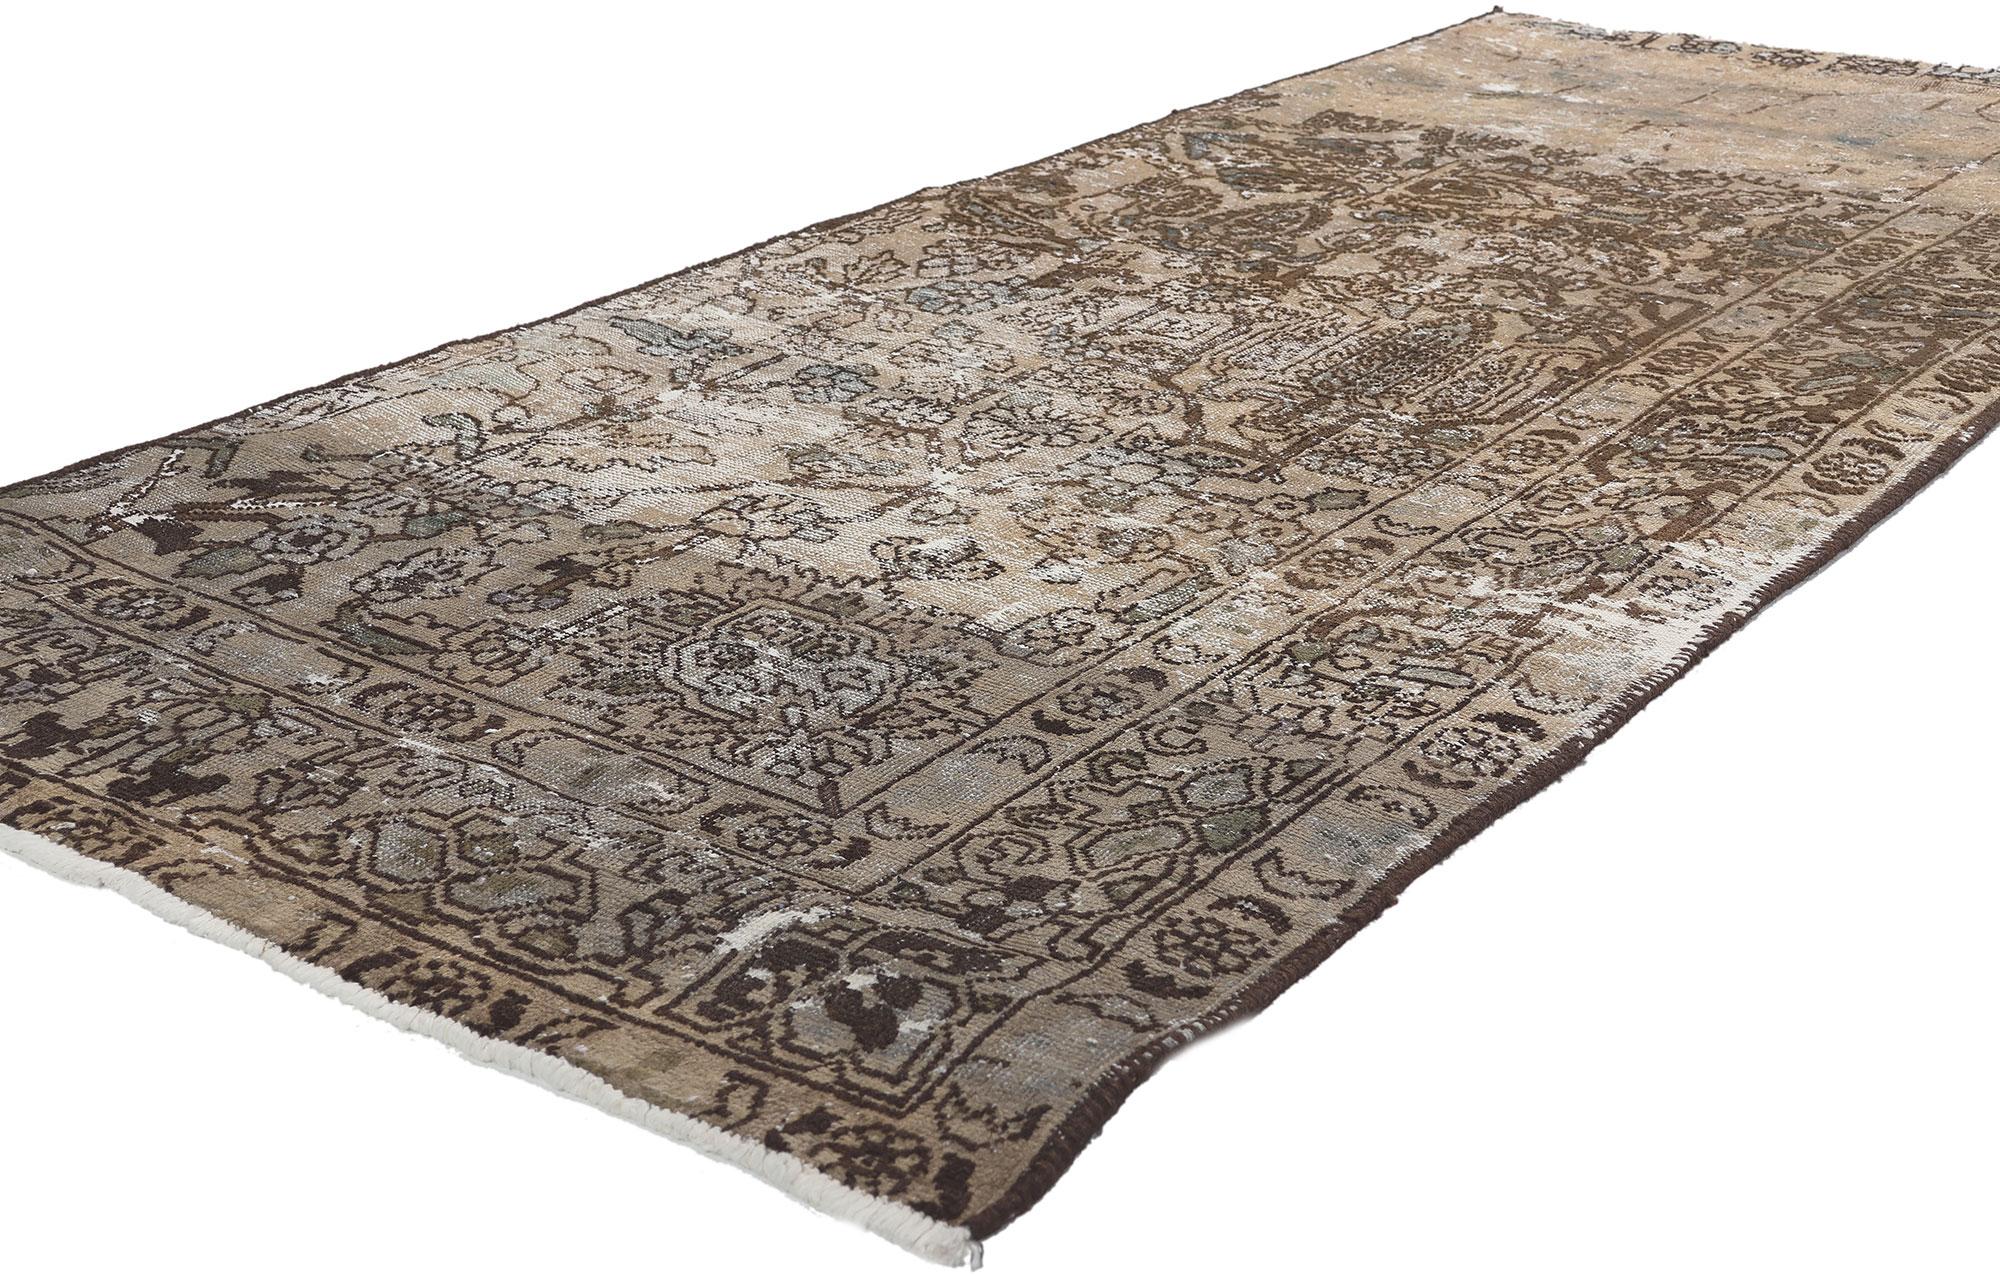 78603 Distressed Antique Persian Bakhtiari Rug, 03'00 x 07'02. 
Weathered charm meets rustic sensibility in this distressed vintage Persian Bakhtiari rug. The faded floral pattern and neutral earth-tone colors woven into this piece work together